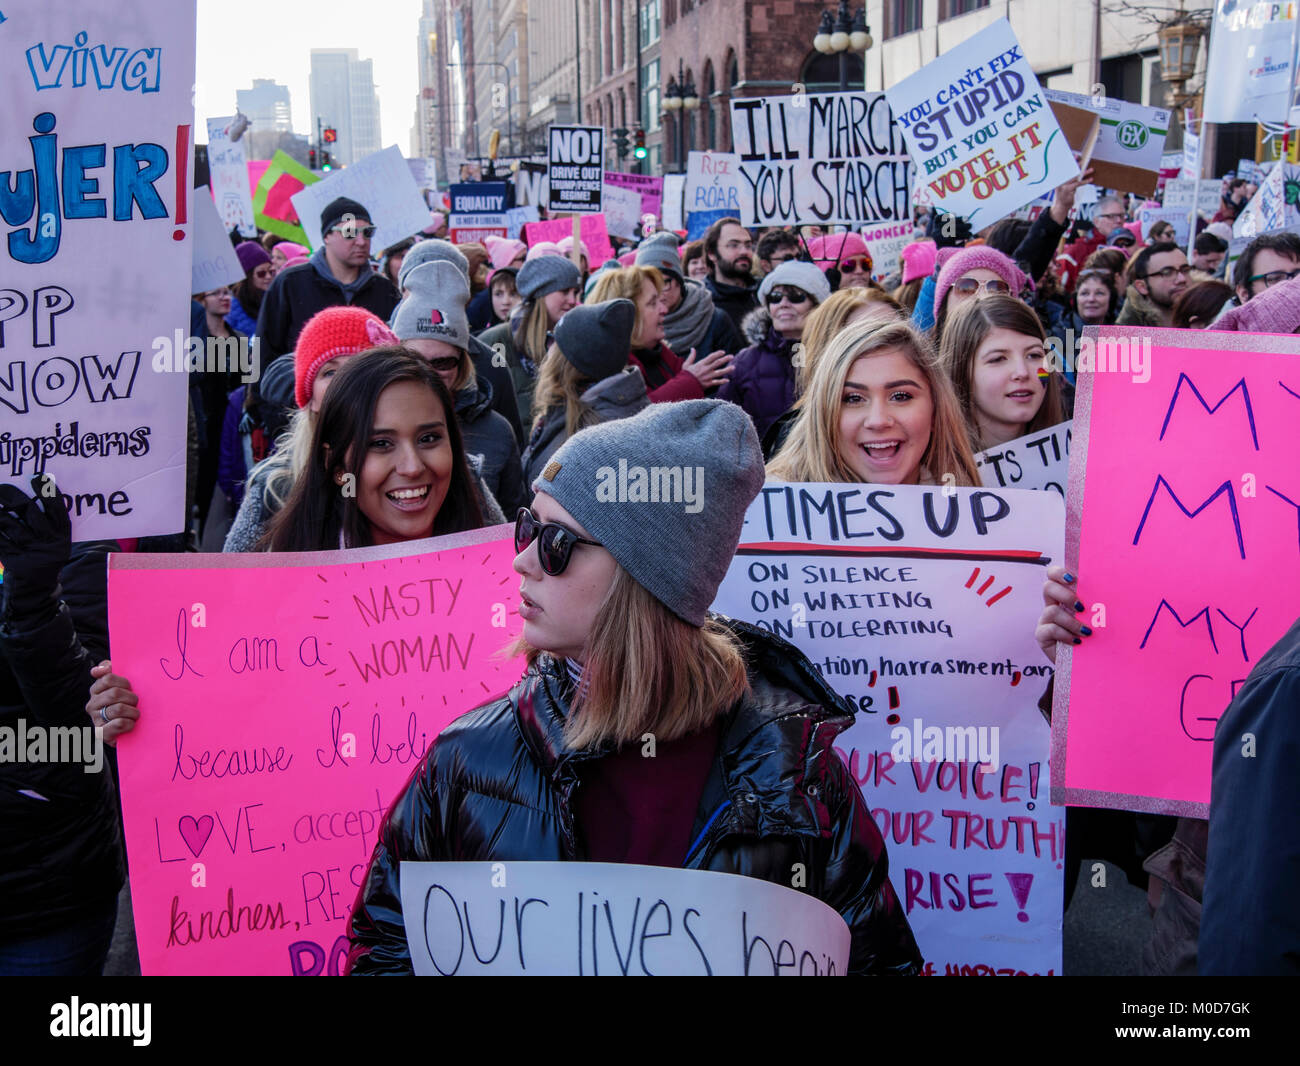 Chicago, Illinois, USA. 20th January 2018. Nearly 300,000 women and men gathered in Grant Park  for the Women's March to the Polls in this city today. Demonstrators then marched to Federal Plaza at Adams and Dearborn Streets. Stock Photo